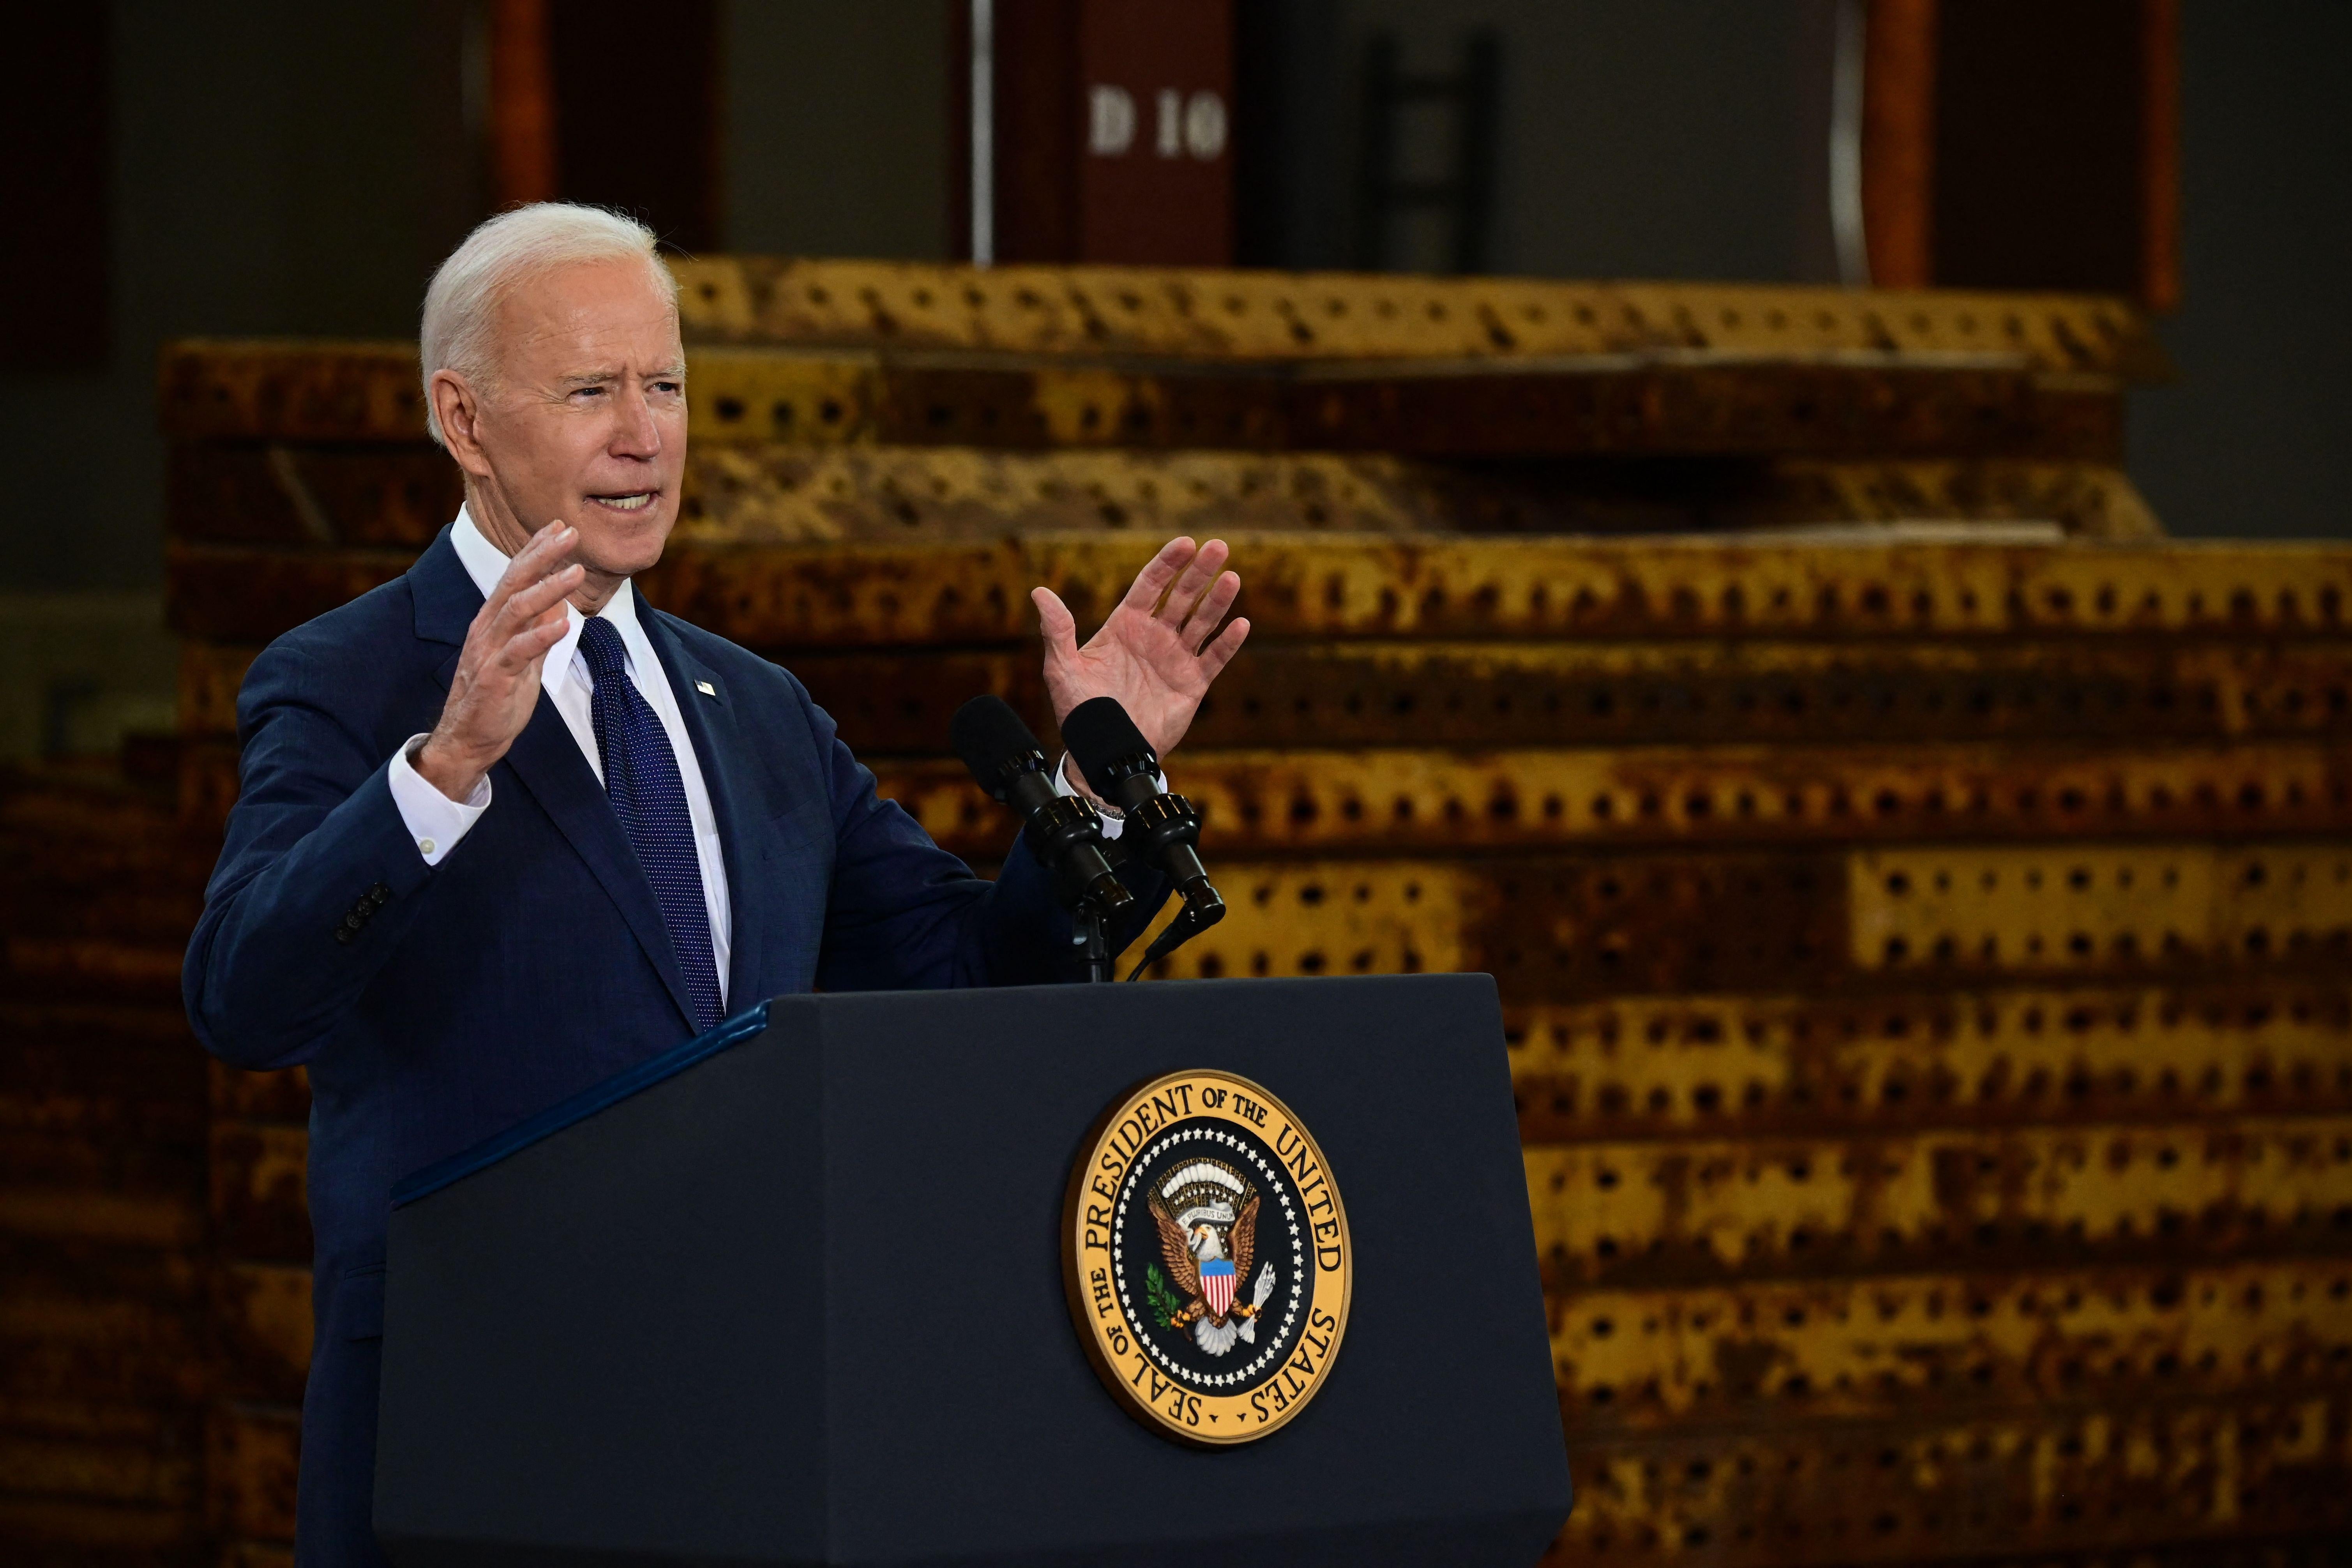 Joe Biden gestures with both hands while speaking at a podium with a stack of rusted metal behind him at a facility in Pittsburgh